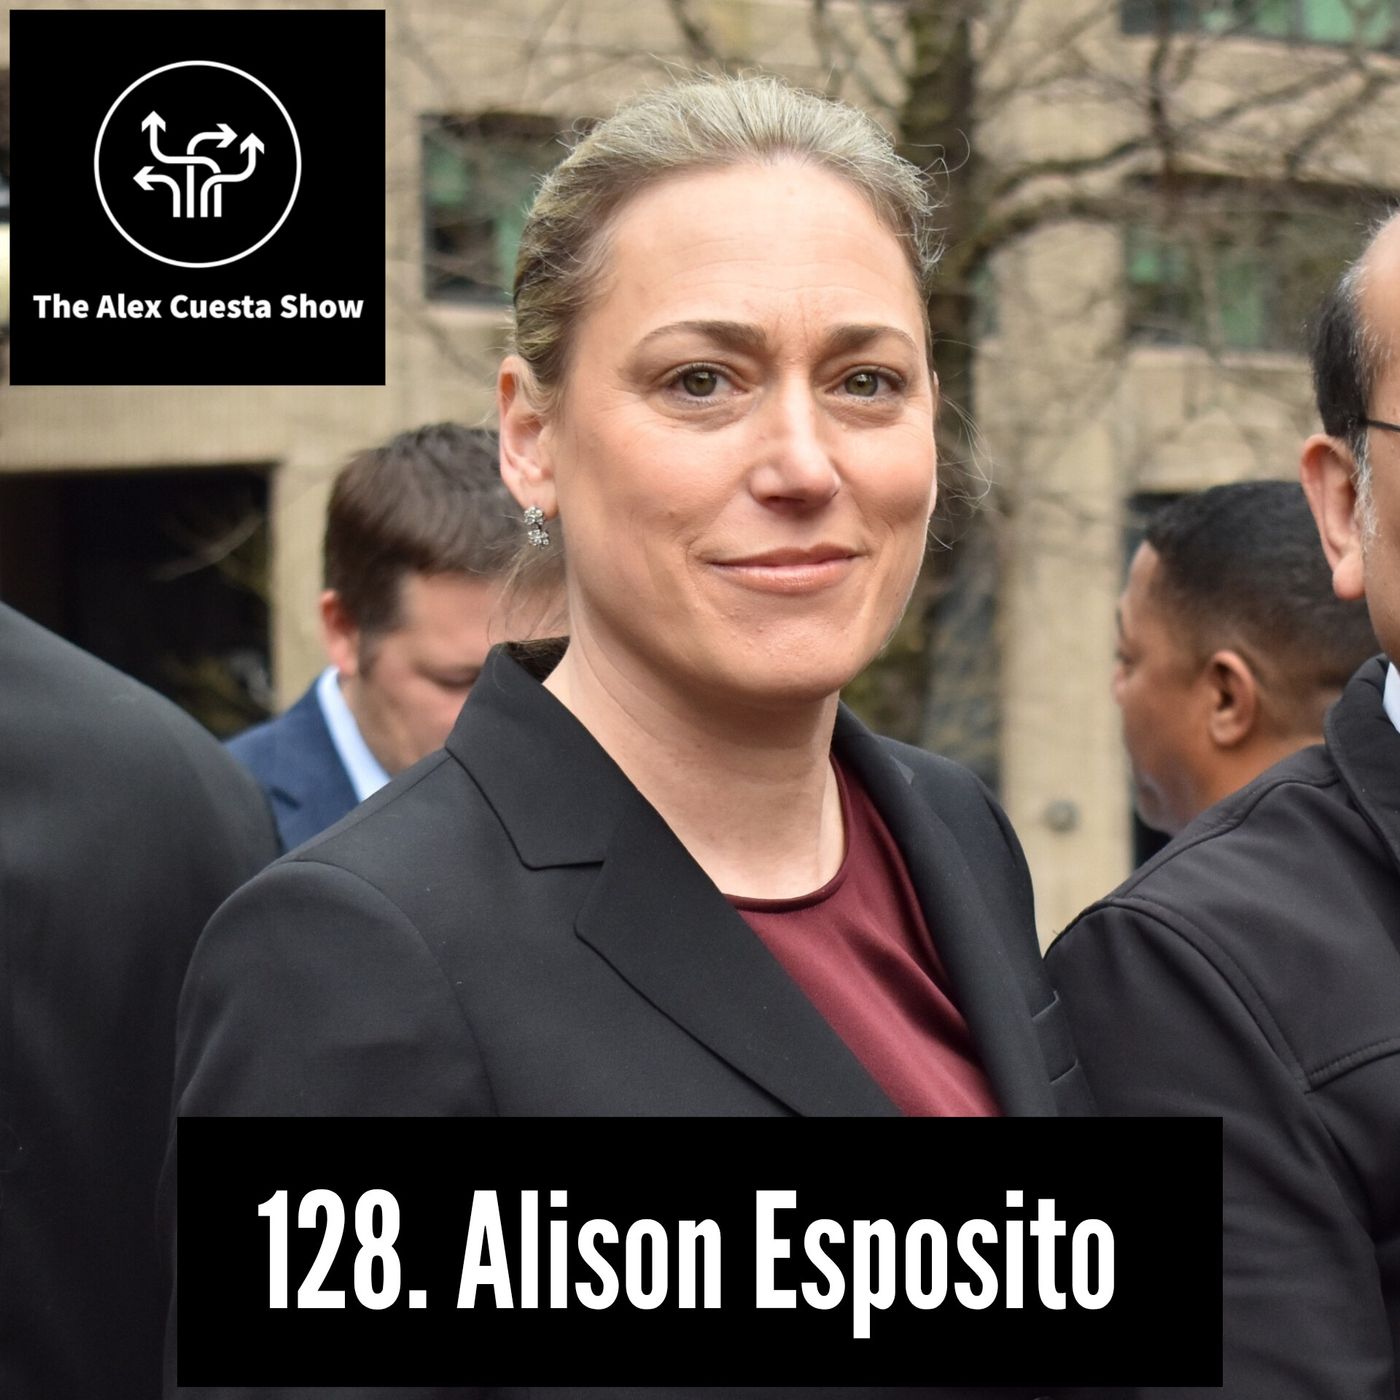 128. Alison Esposito, Candidate for Congress in New York's 18th Congressional District